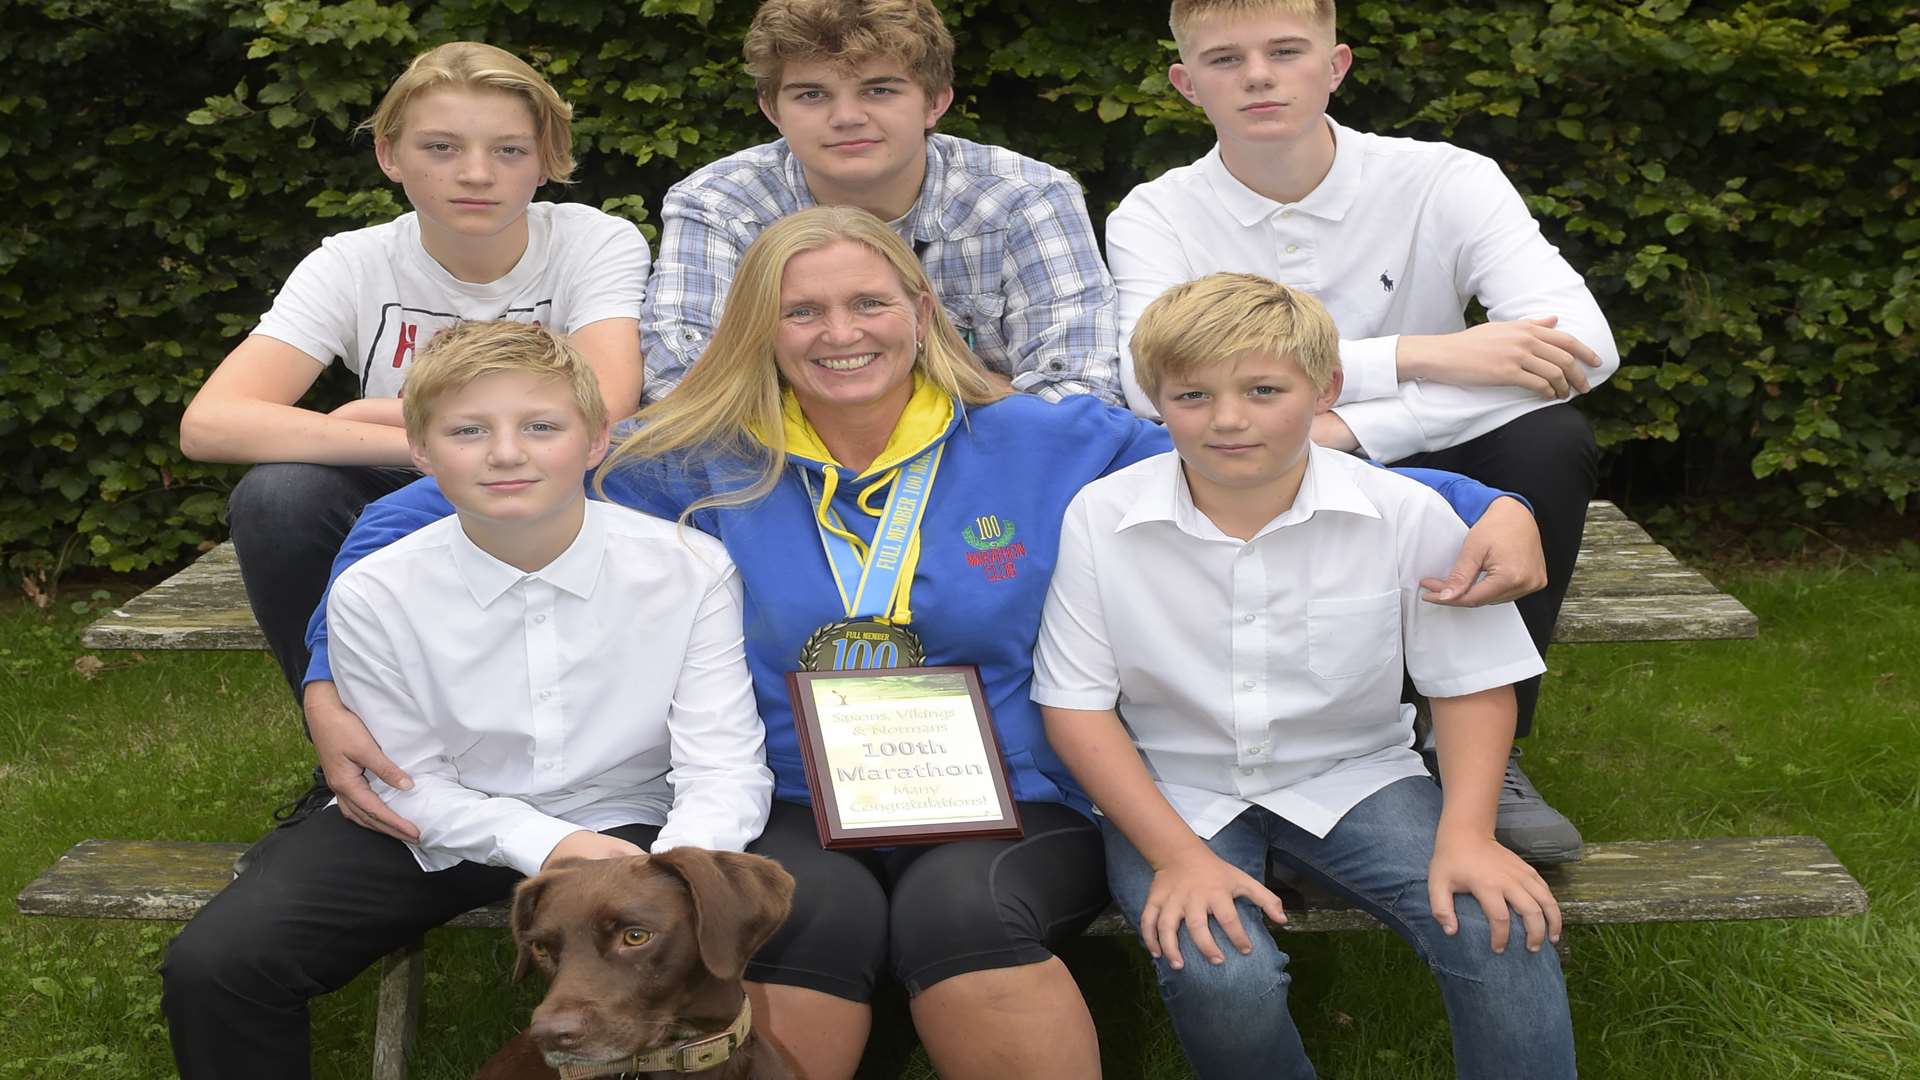 Debbie Sterling, with Harvey aged 13, Angus aged 18, Jay aged 15, Guy aged 11,and Rufos aged 10